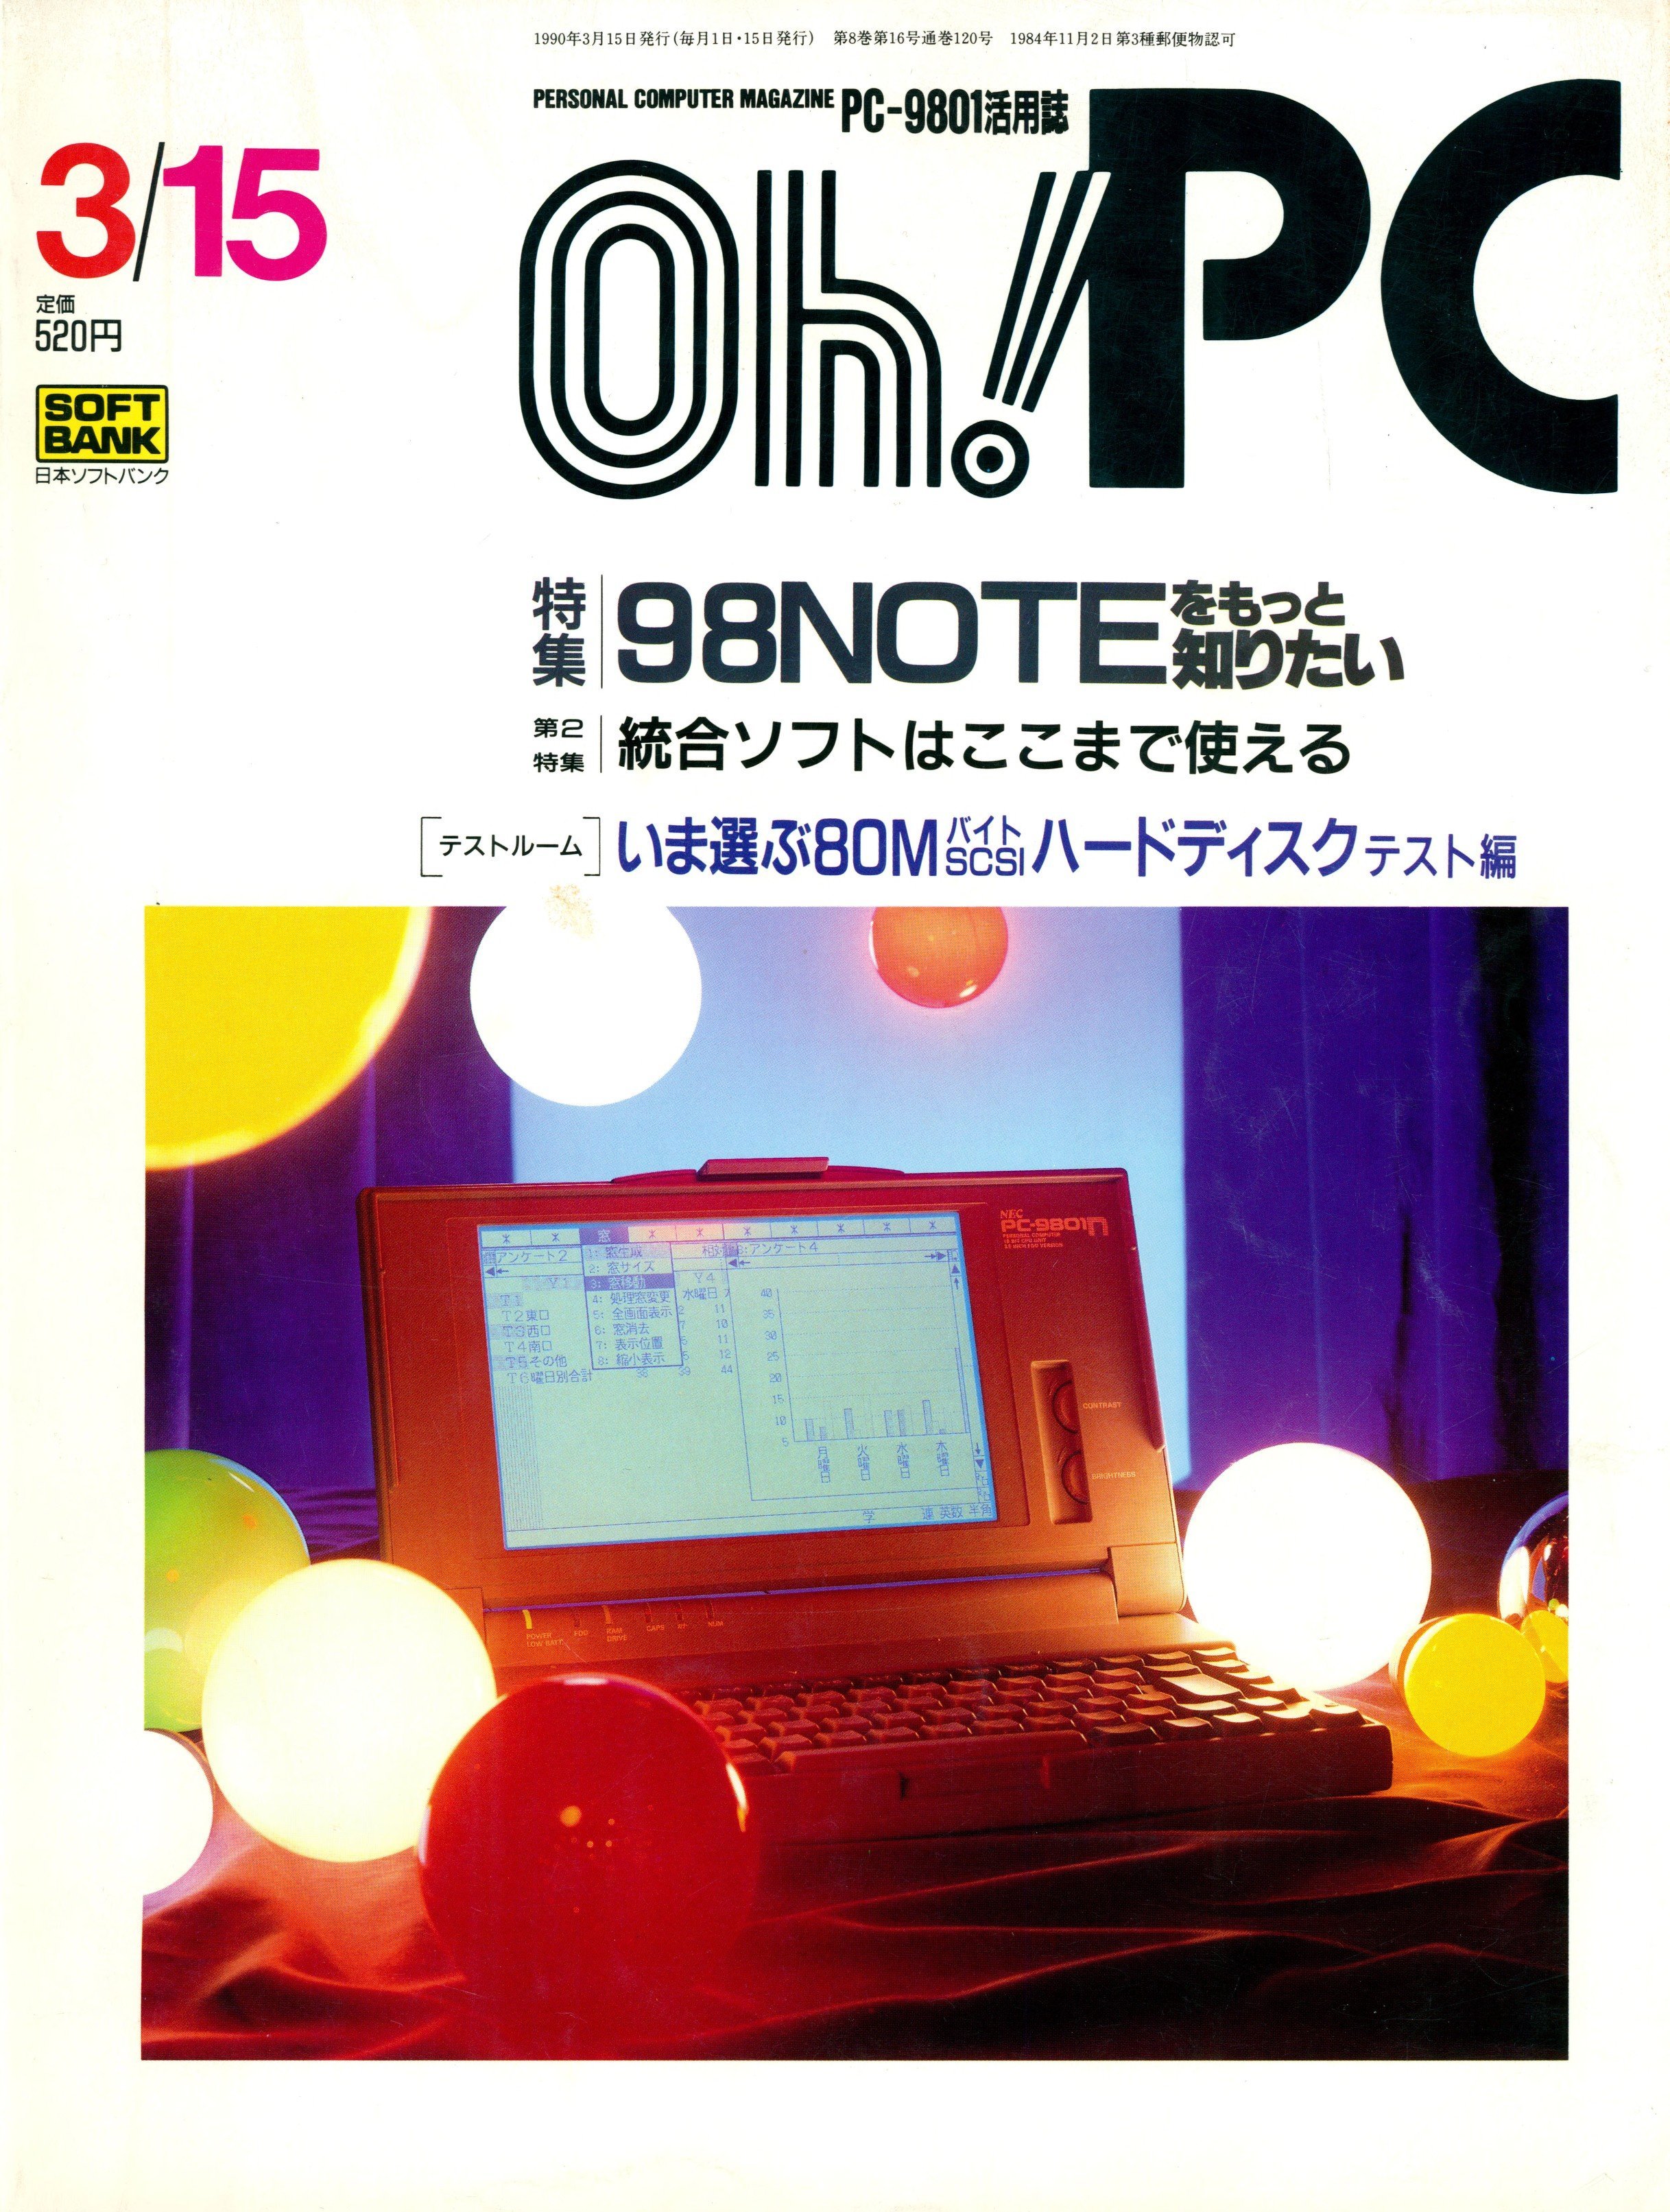 Oh! PC Issue 120 (Mar 15, 1990)